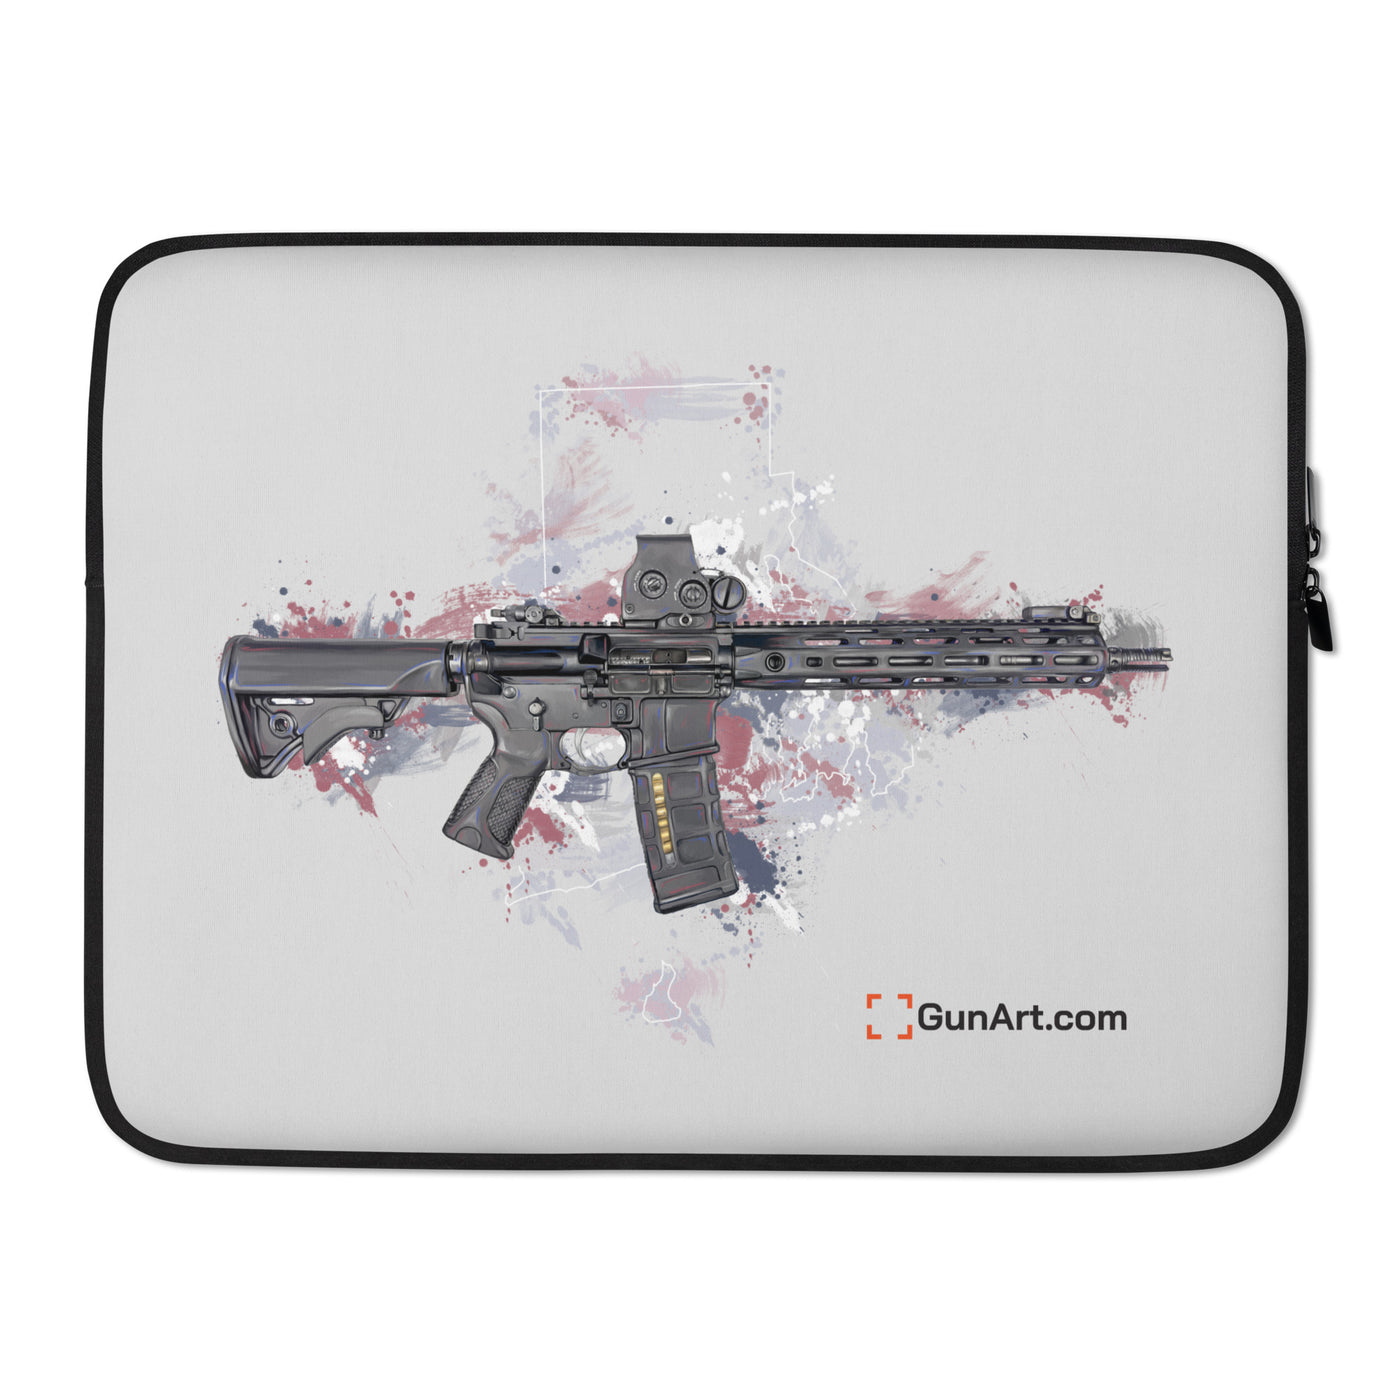 Defending Freedom - Rhode Island - AR-15 State Laptop Sleeve - White State